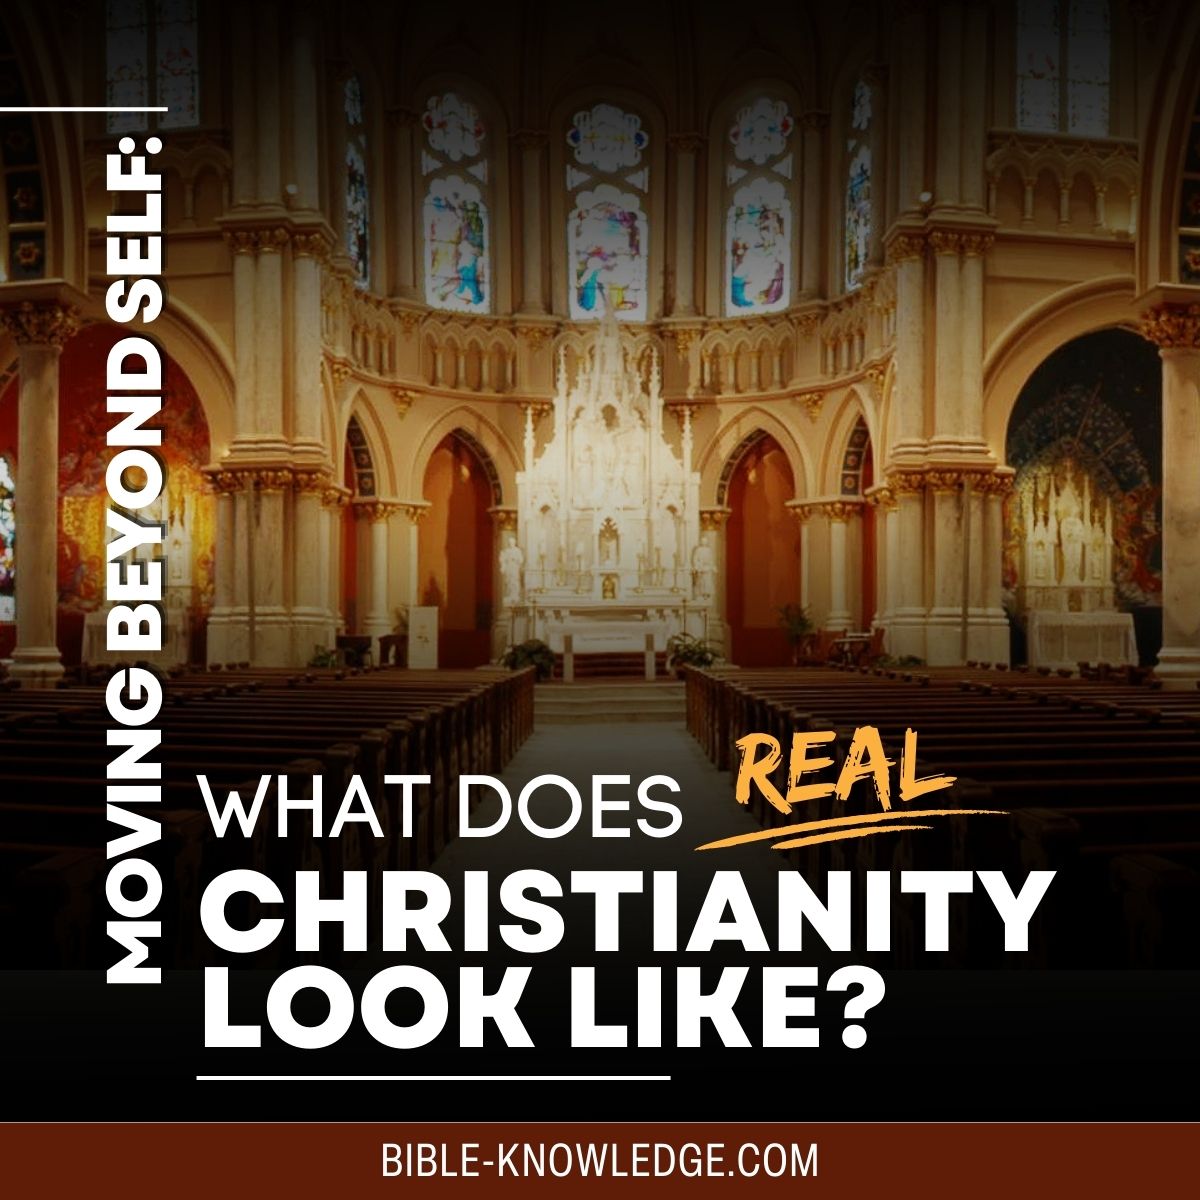 What Does Real Christianity Look Like?